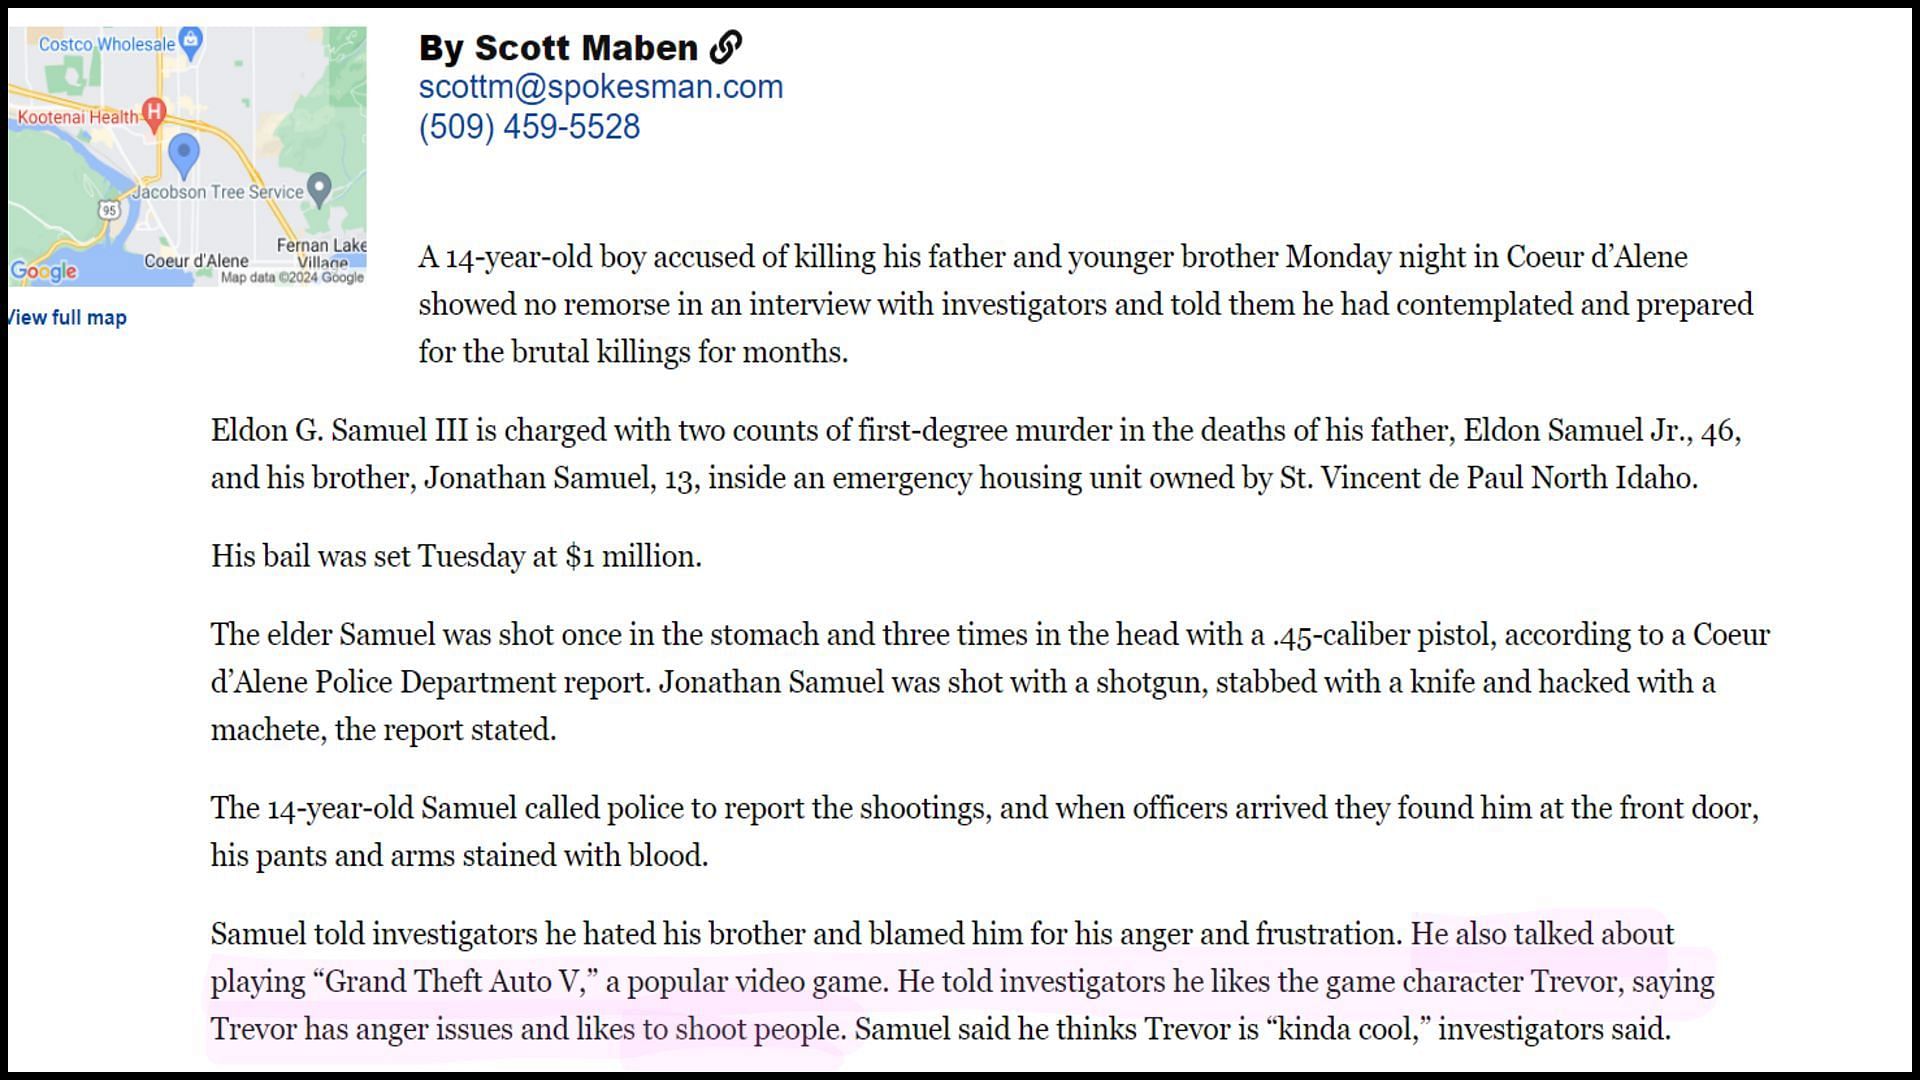 A screenshot of the new article published by The Spokesman-Review (Image via The Spokesman-Review)